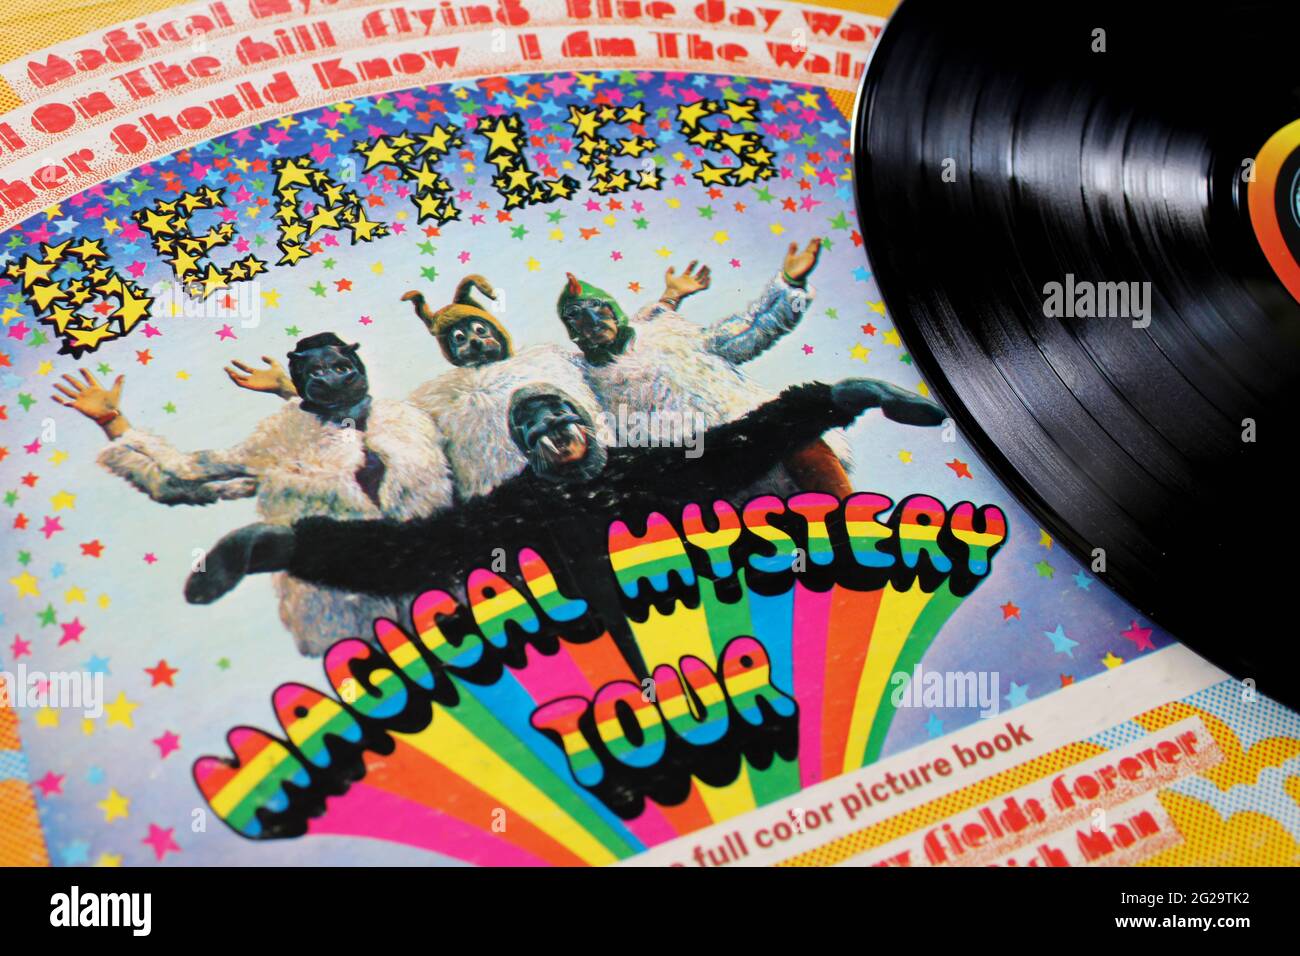 Magical mystery tour is a soundtrack for a television film album by the English rock band the Beatles. Album cover Stock Photo